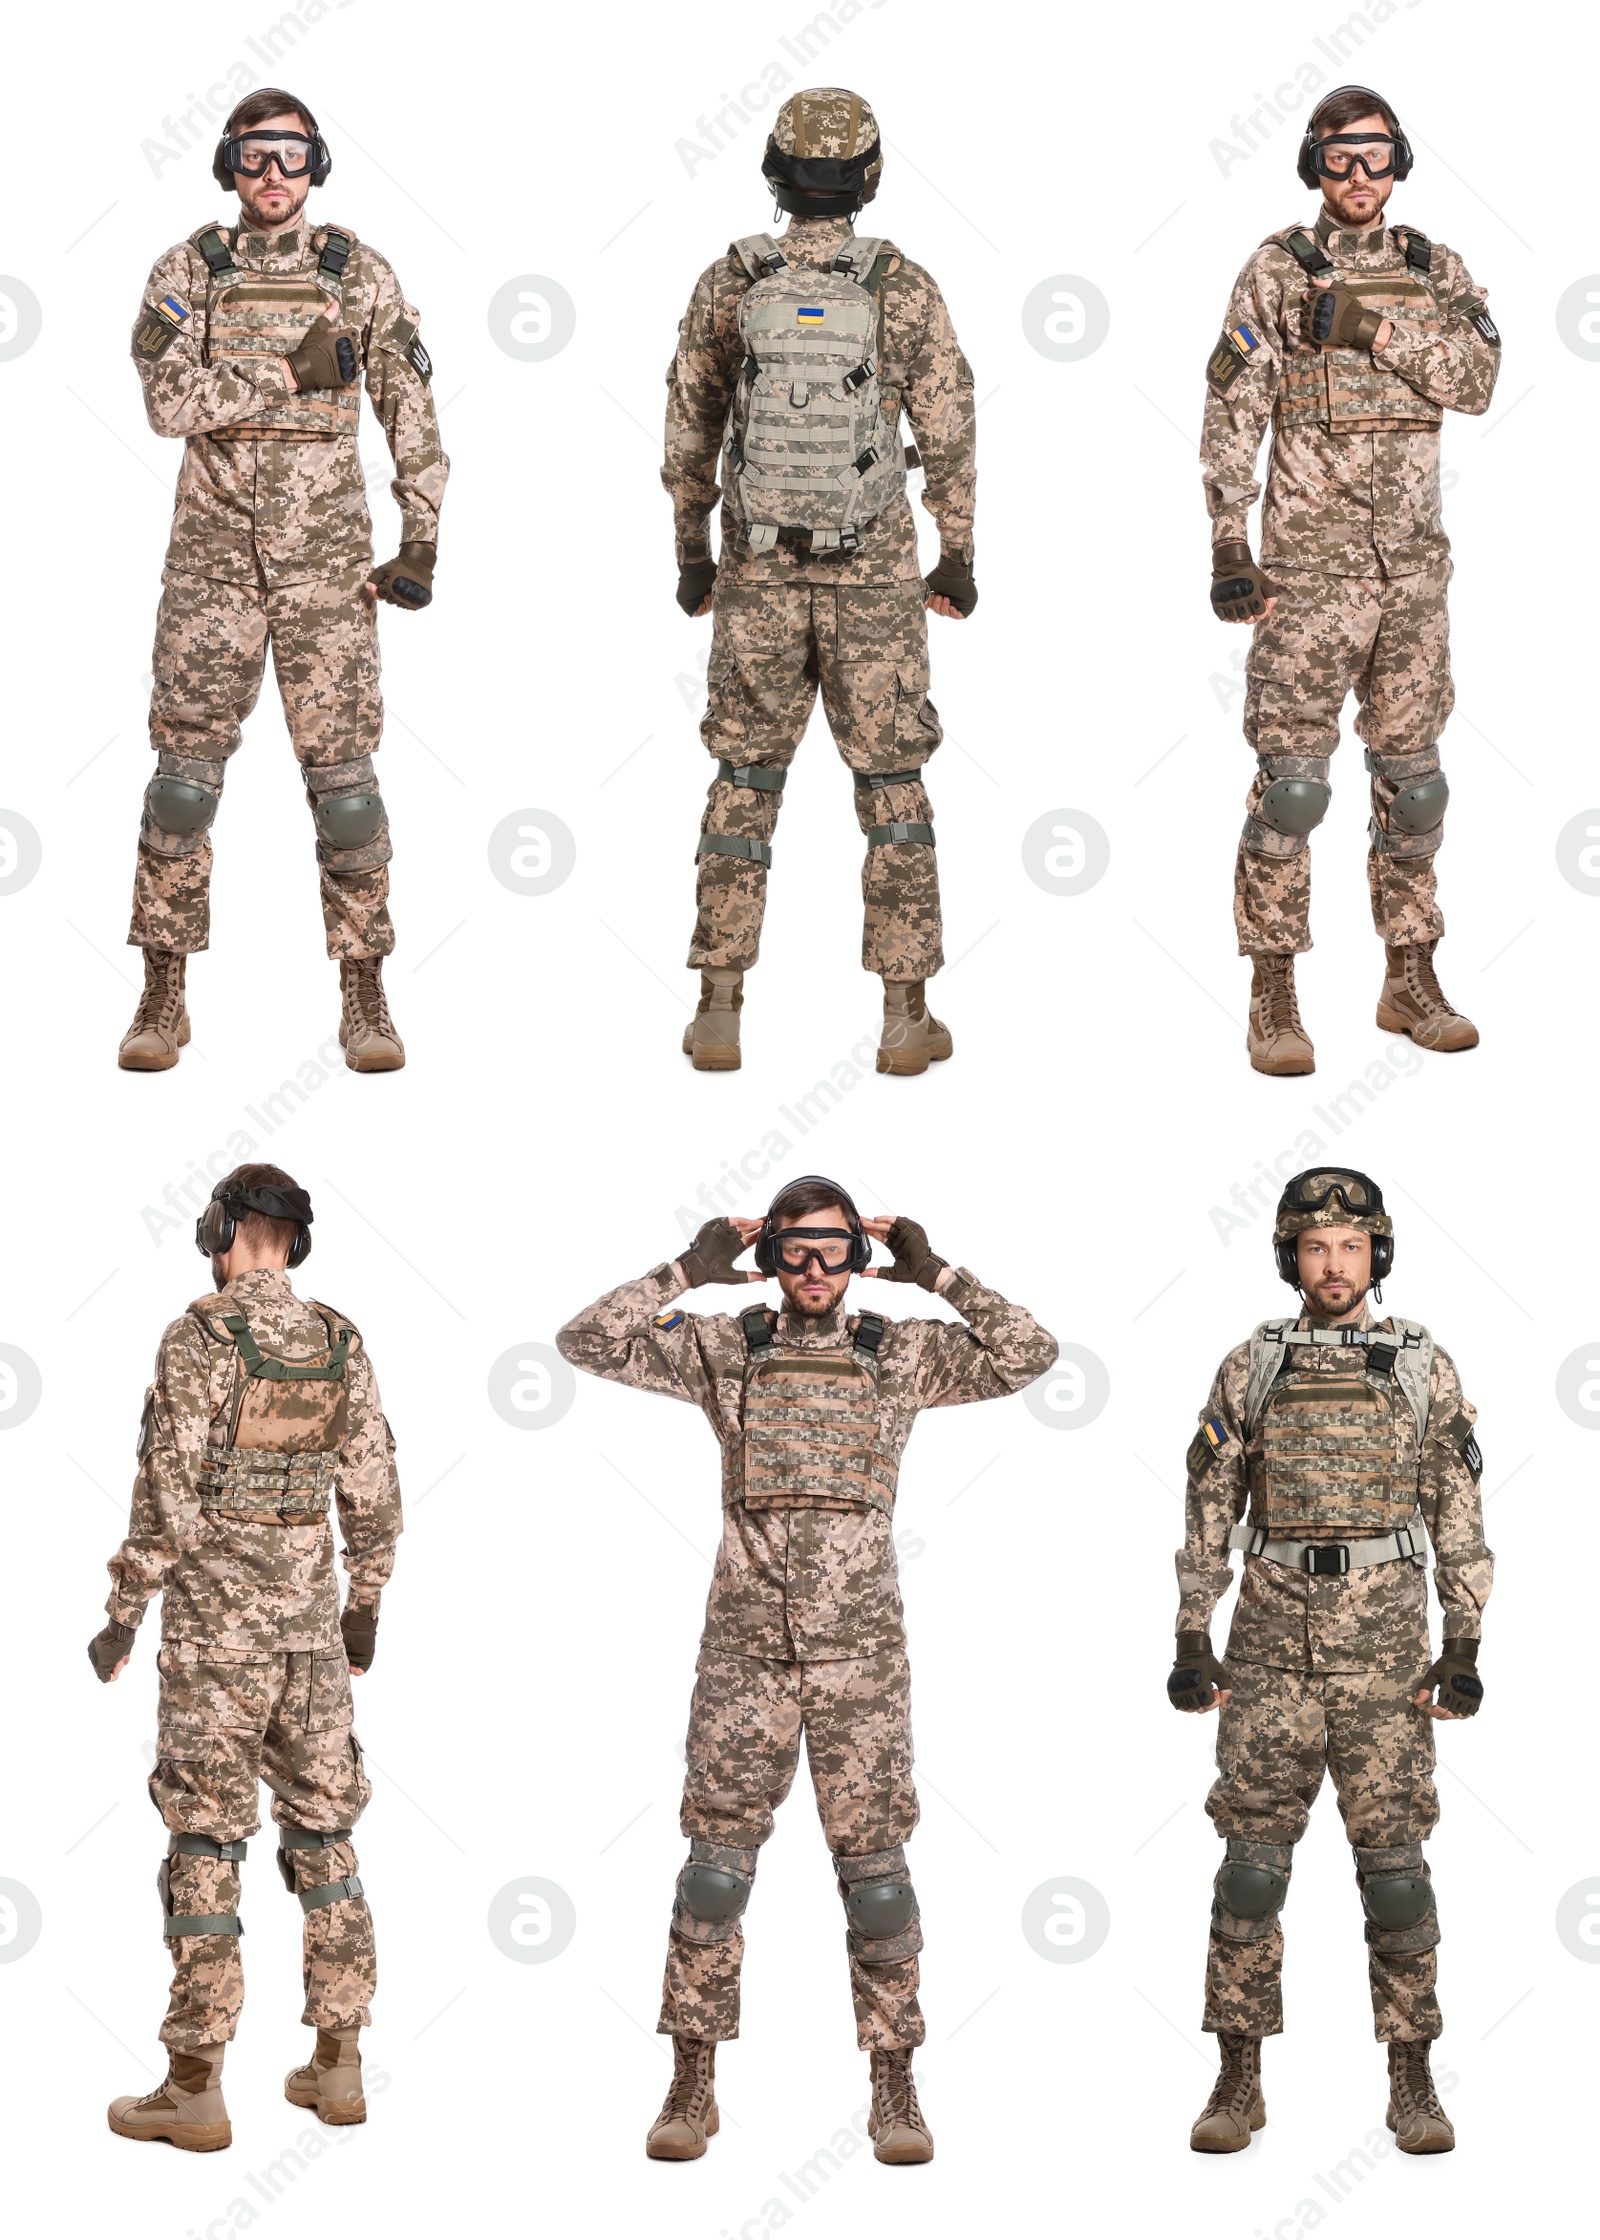 Image of Collage with photos of Ukrainian soldier wearing military uniform on white background